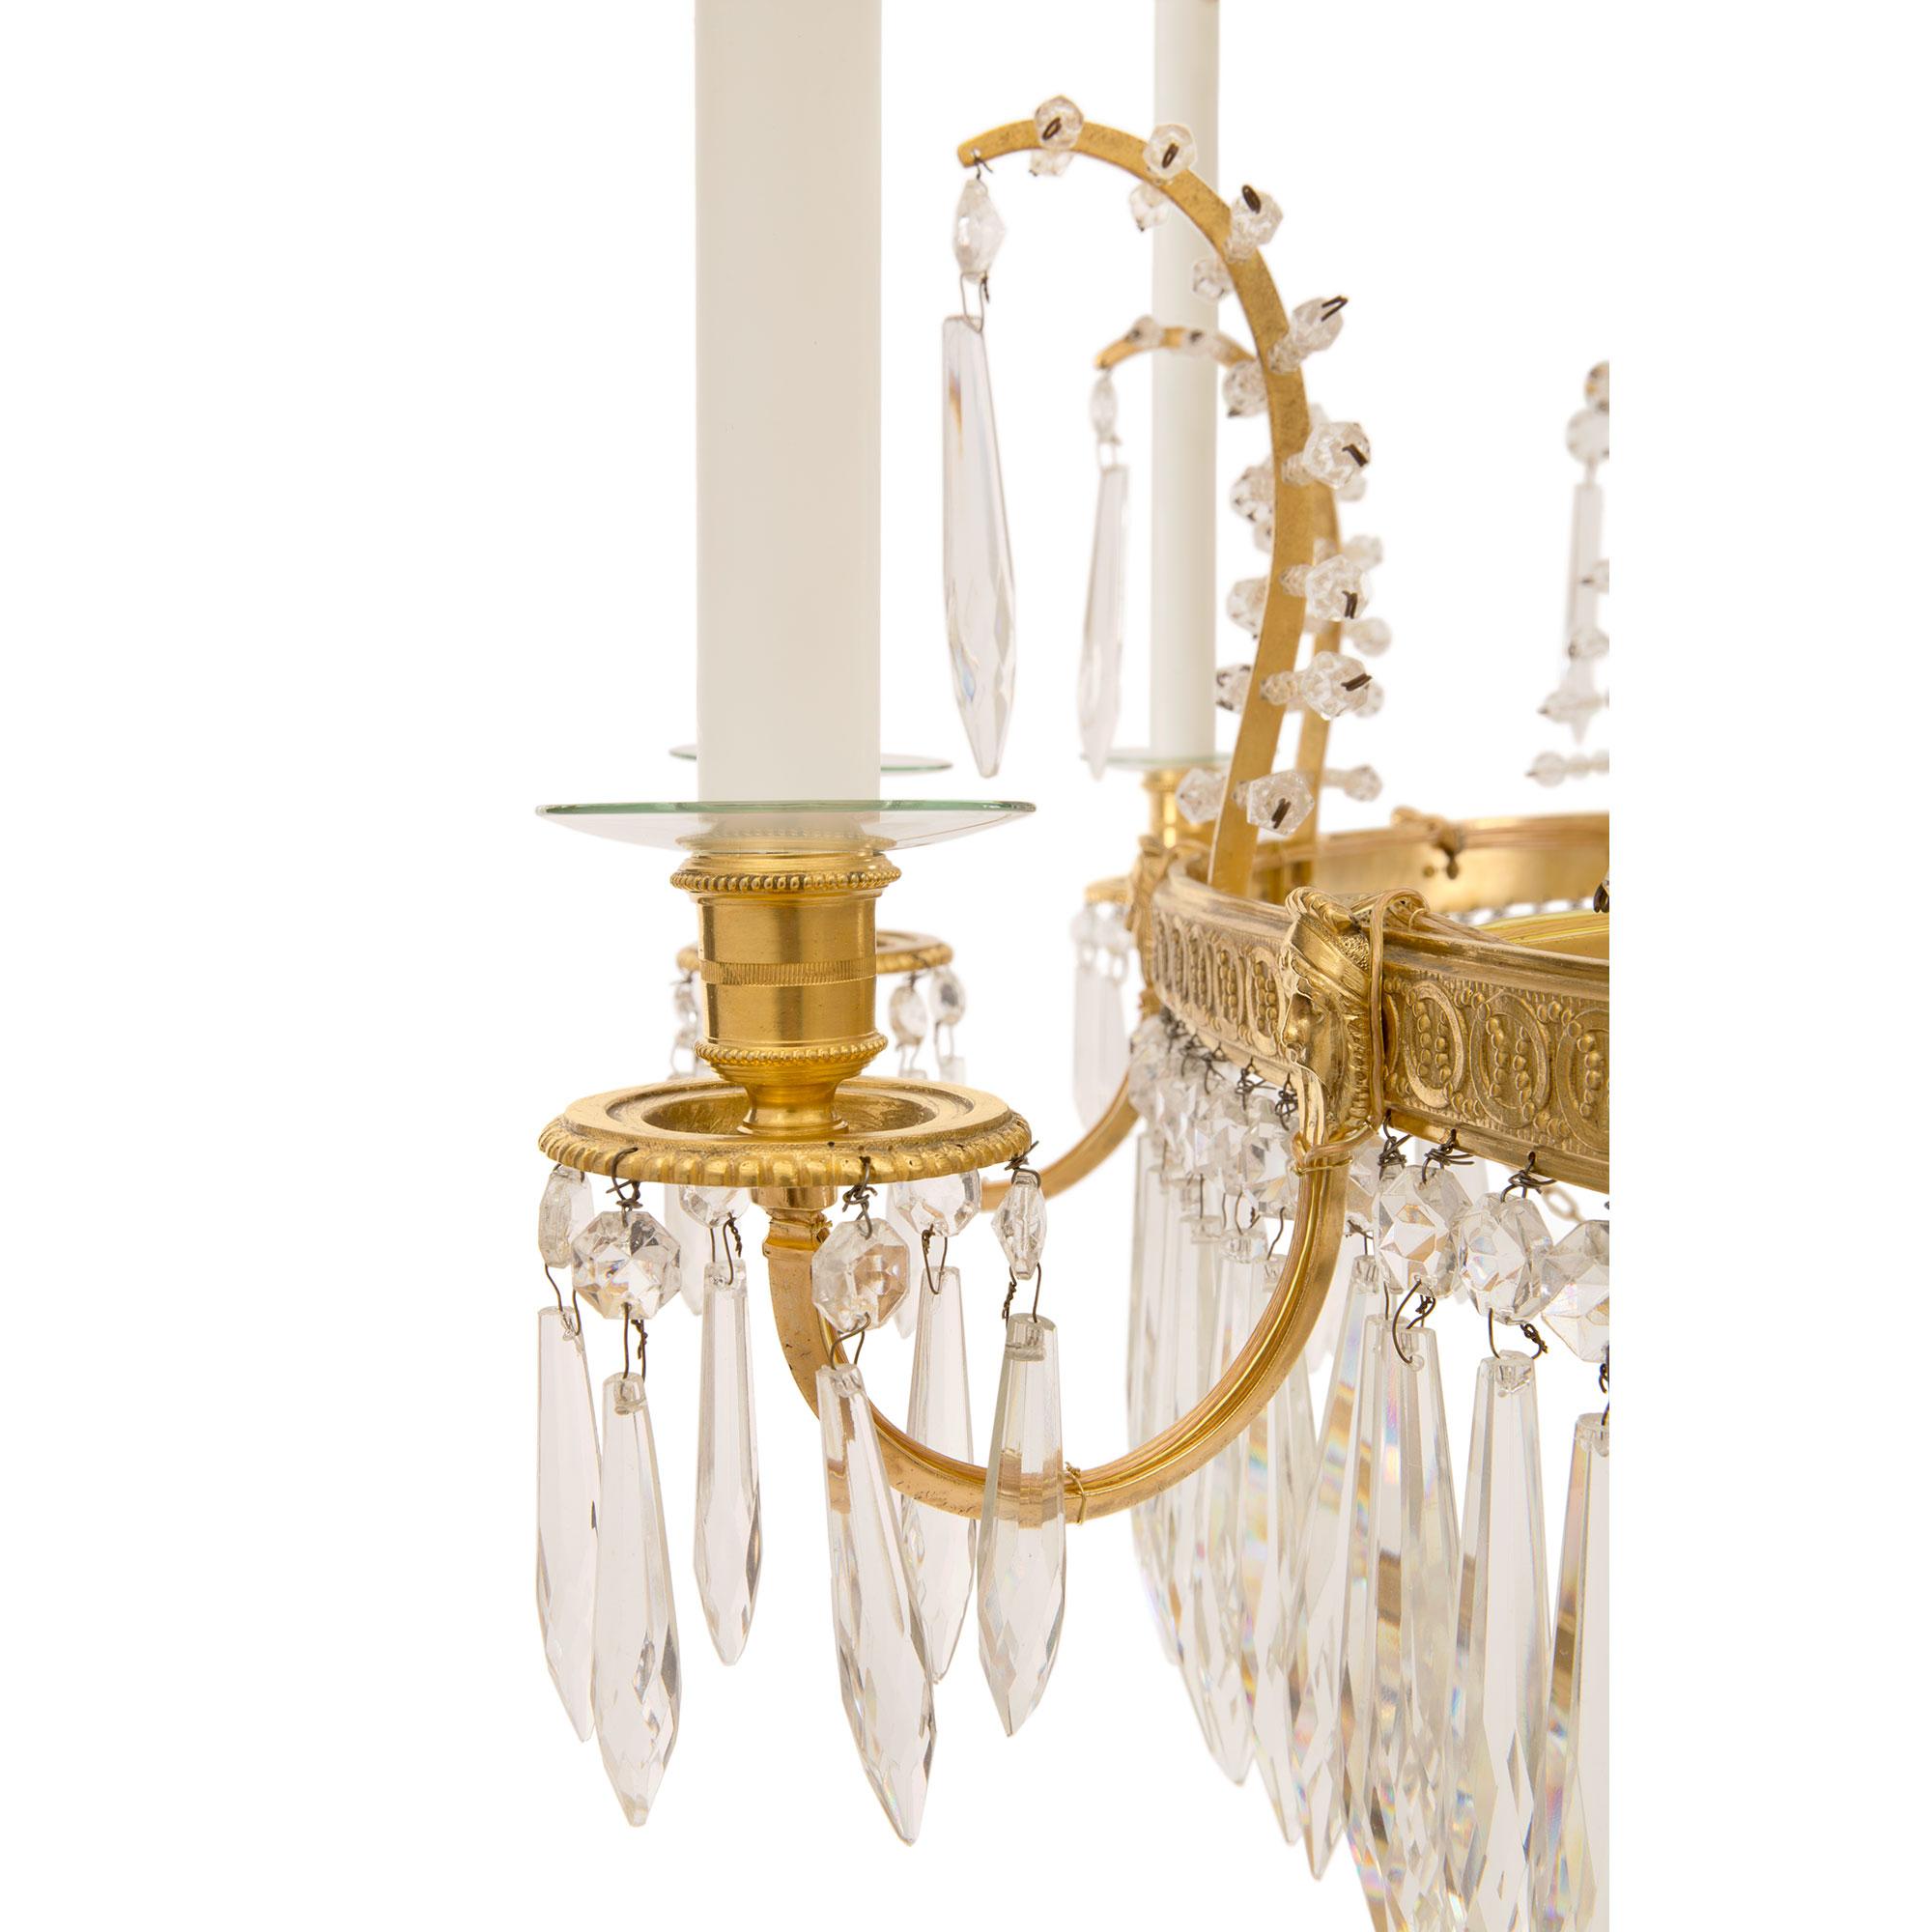 Russian Early 19th Century Neoclassical Style Ormolu and Crystal Chandelier For Sale 2